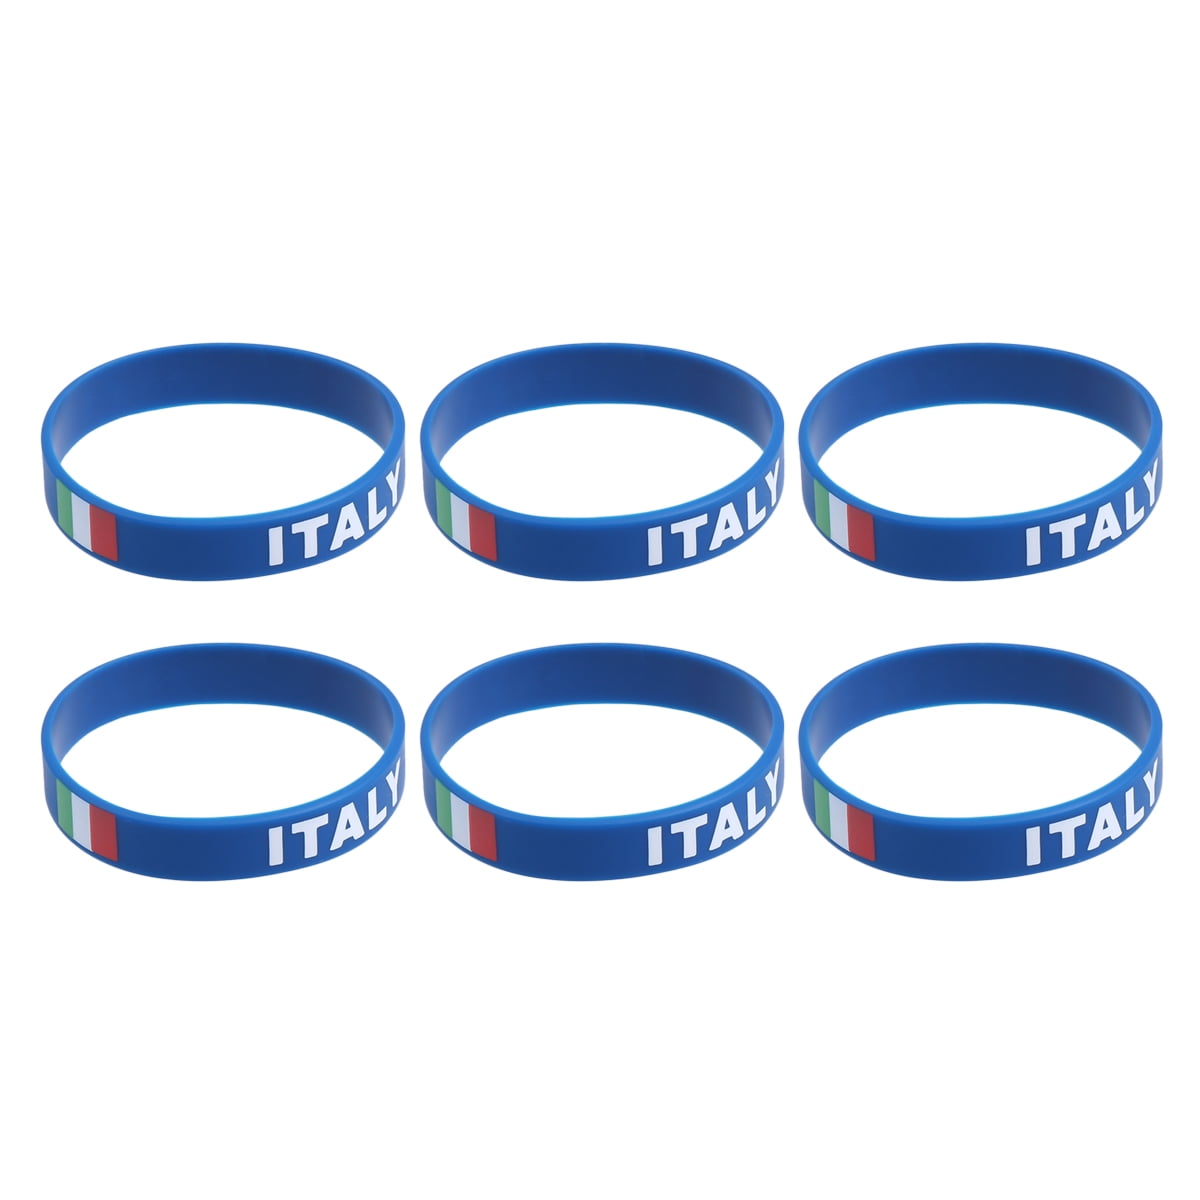 Kids Play LIOOBO Silicone Bracelet with France Flag Blue,10 pcs France Flag Rubber Wristbands Party Favors,Football Match Games Sports Bracelet for Sports Teams 